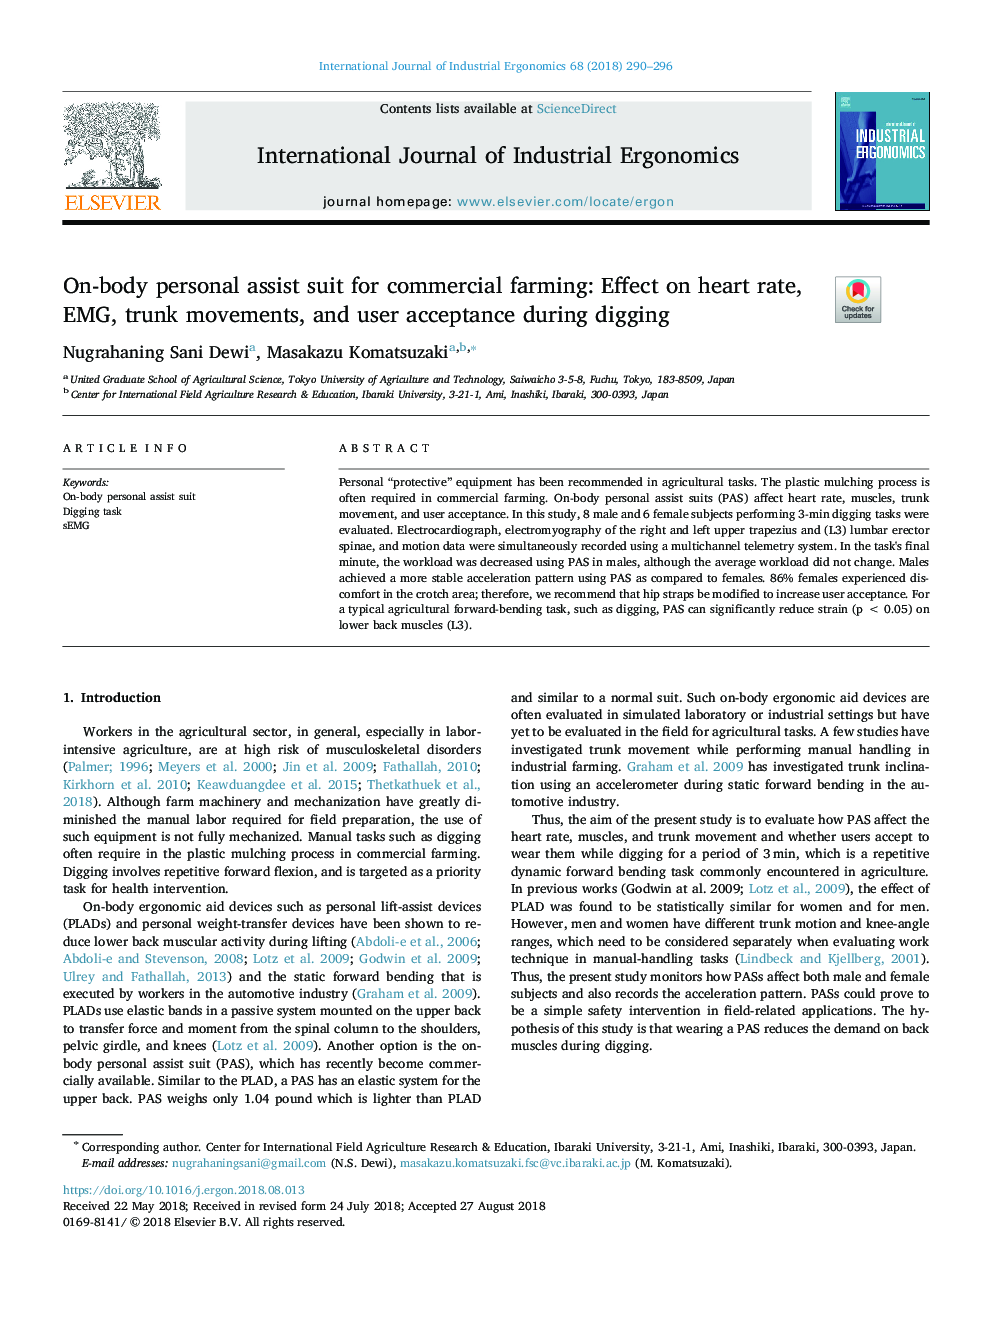 On-body personal assist suit for commercial farming: Effect on heart rate, EMG, trunk movements, and user acceptance during digging